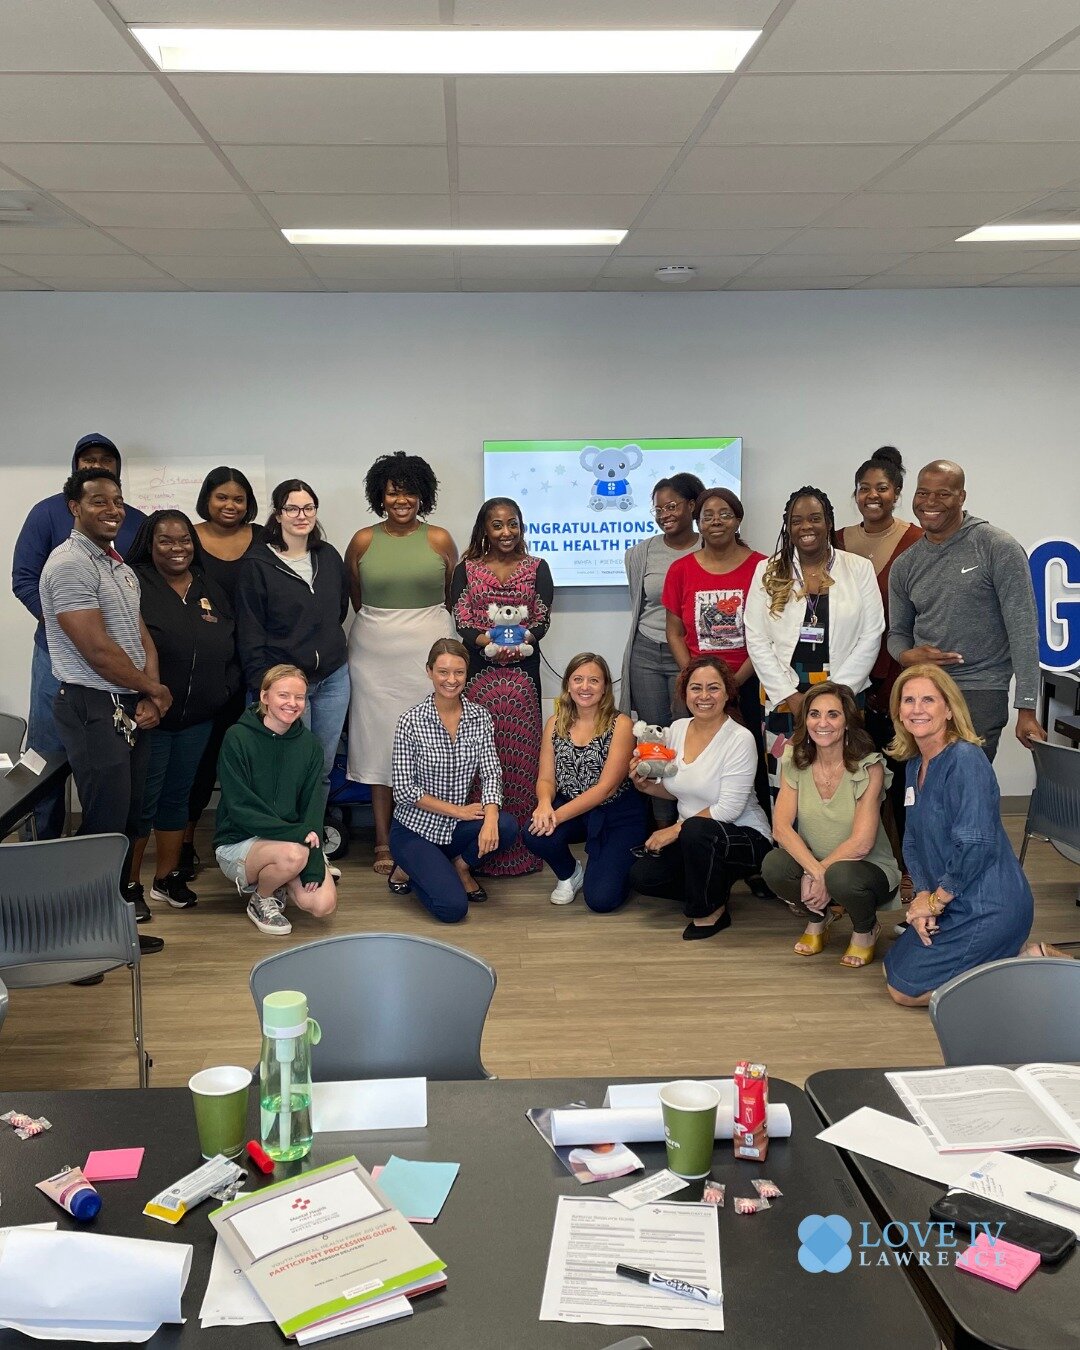 Collaboration is key when it comes to supporting the mental health of our youth! 💙

On April 25th, we were honored to meet with the staff &amp; students at Starting Right, Now-- an amazing organization that provides crucial assistance to homeless te